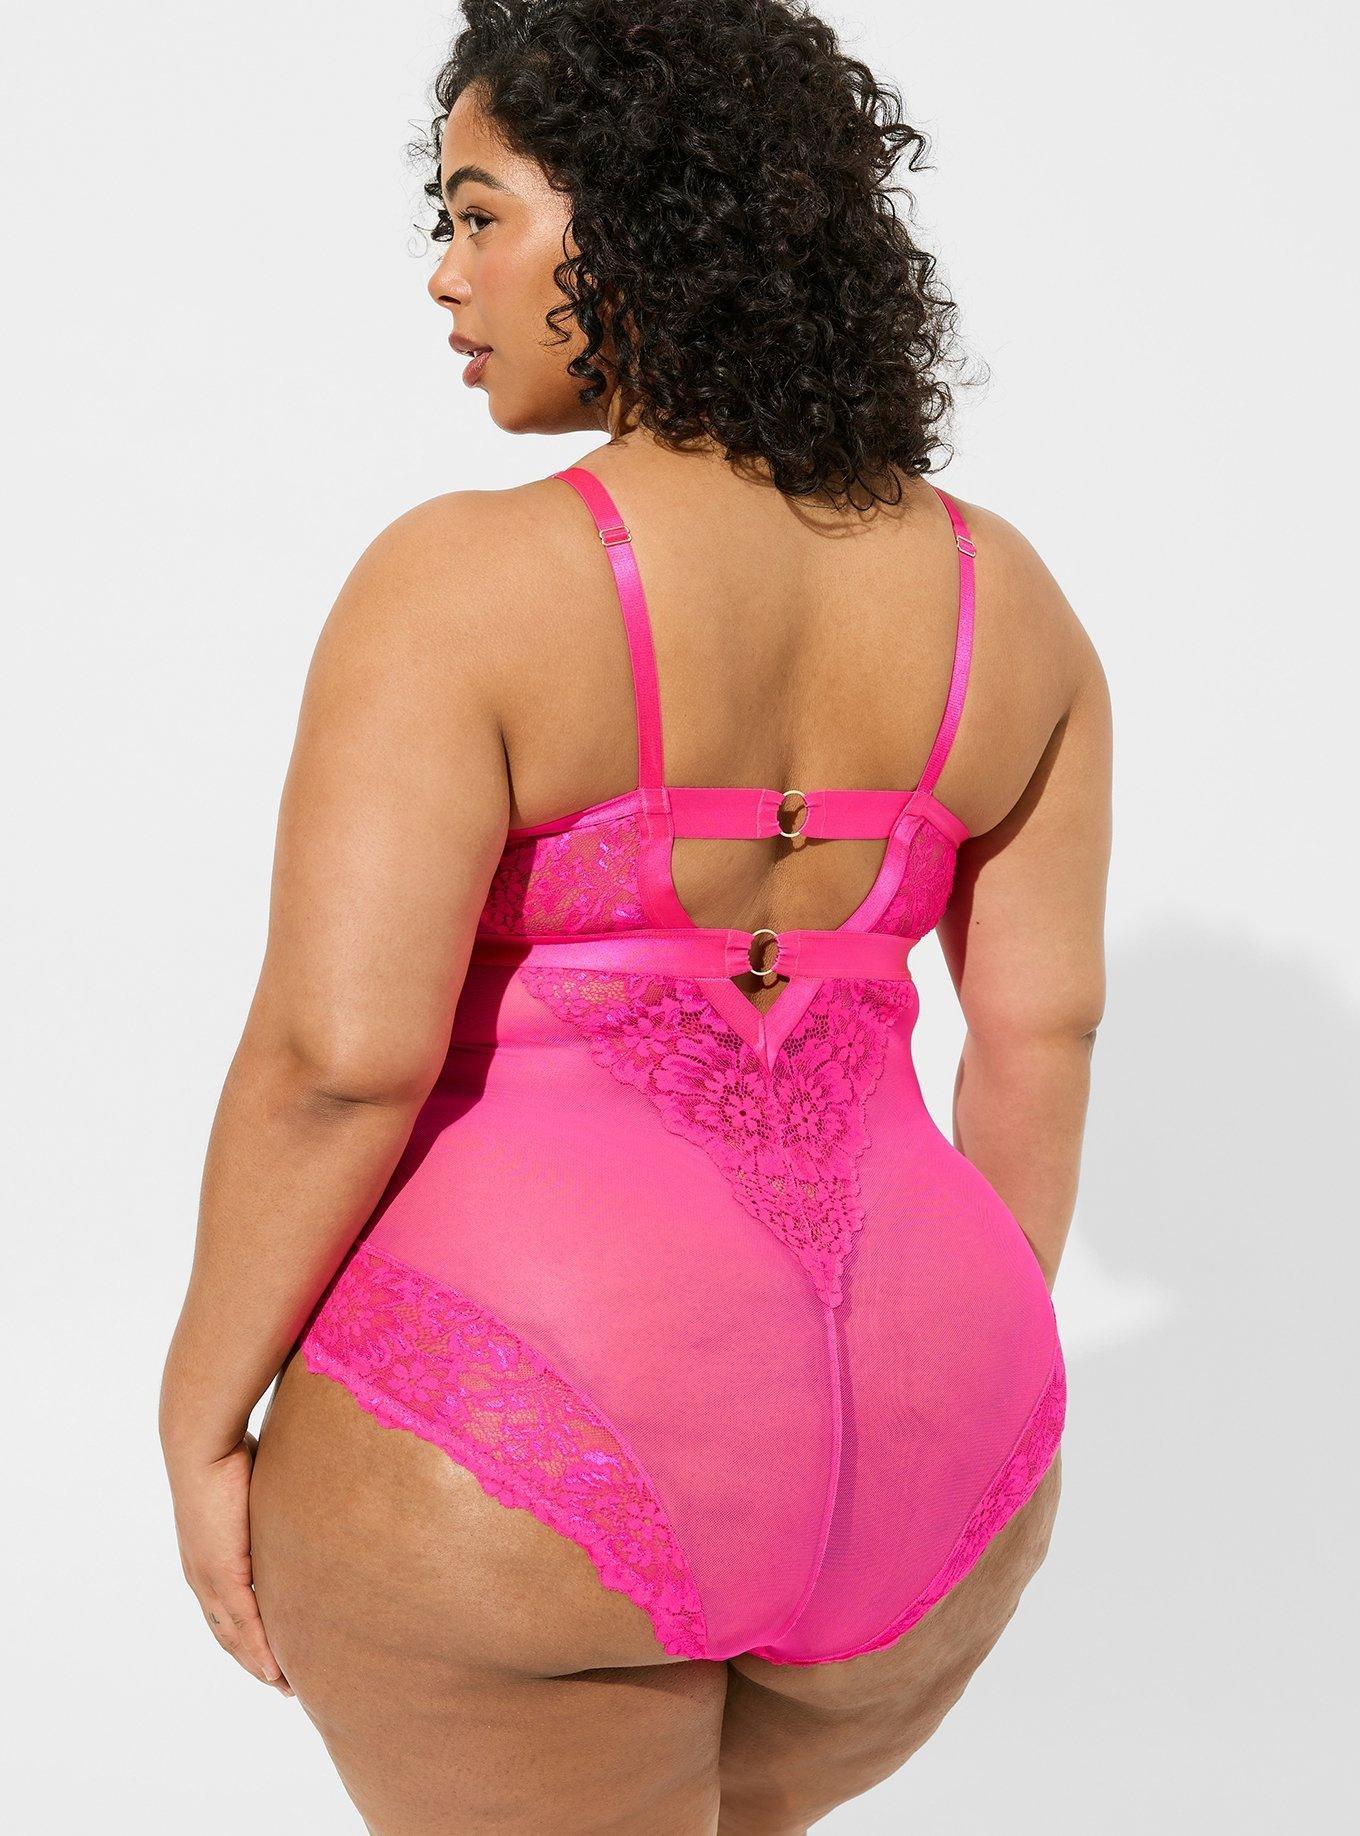 OMG! The best styles of lingerie bodysuits of all time!